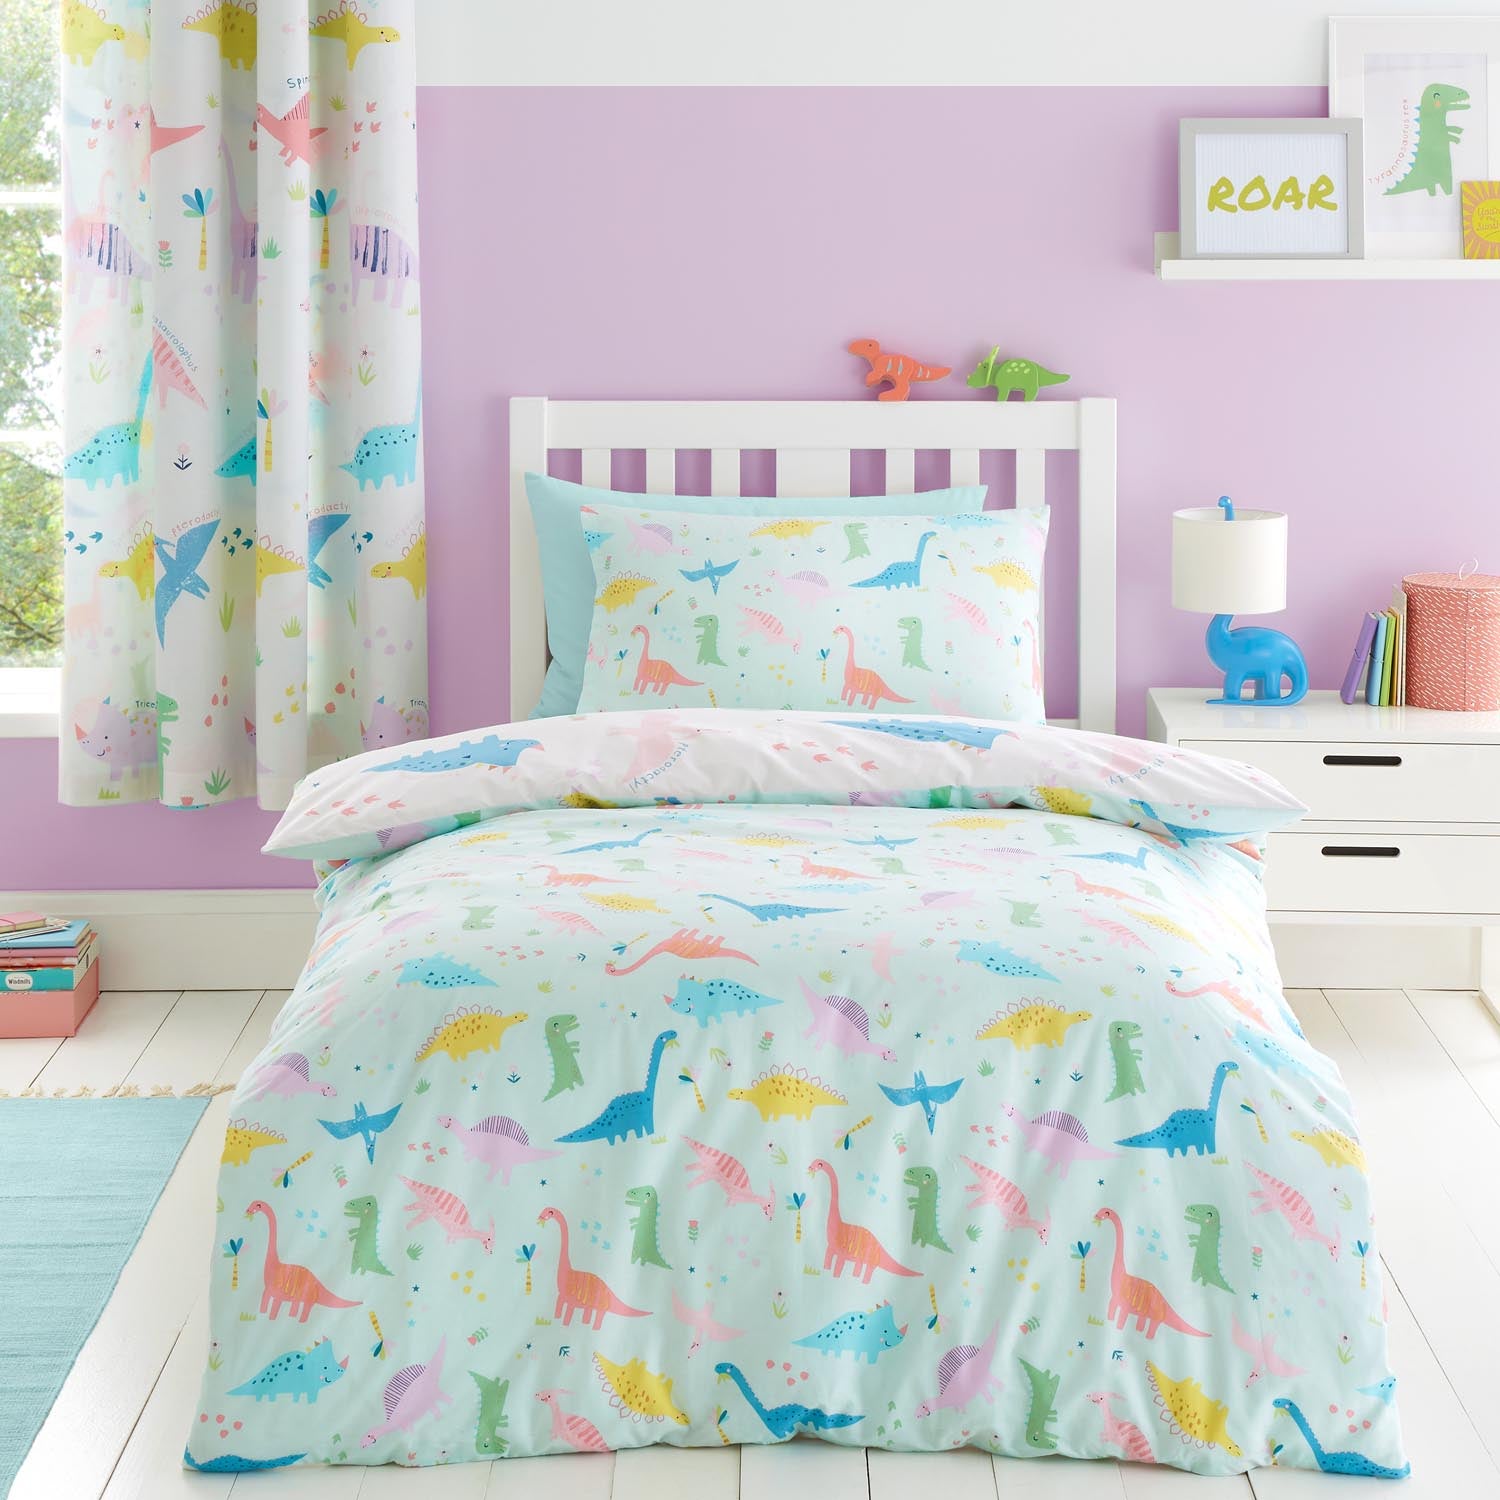 The Home Luxury Collection Loveable Dinosaur Duvet Cover 1 Shaws Department Stores